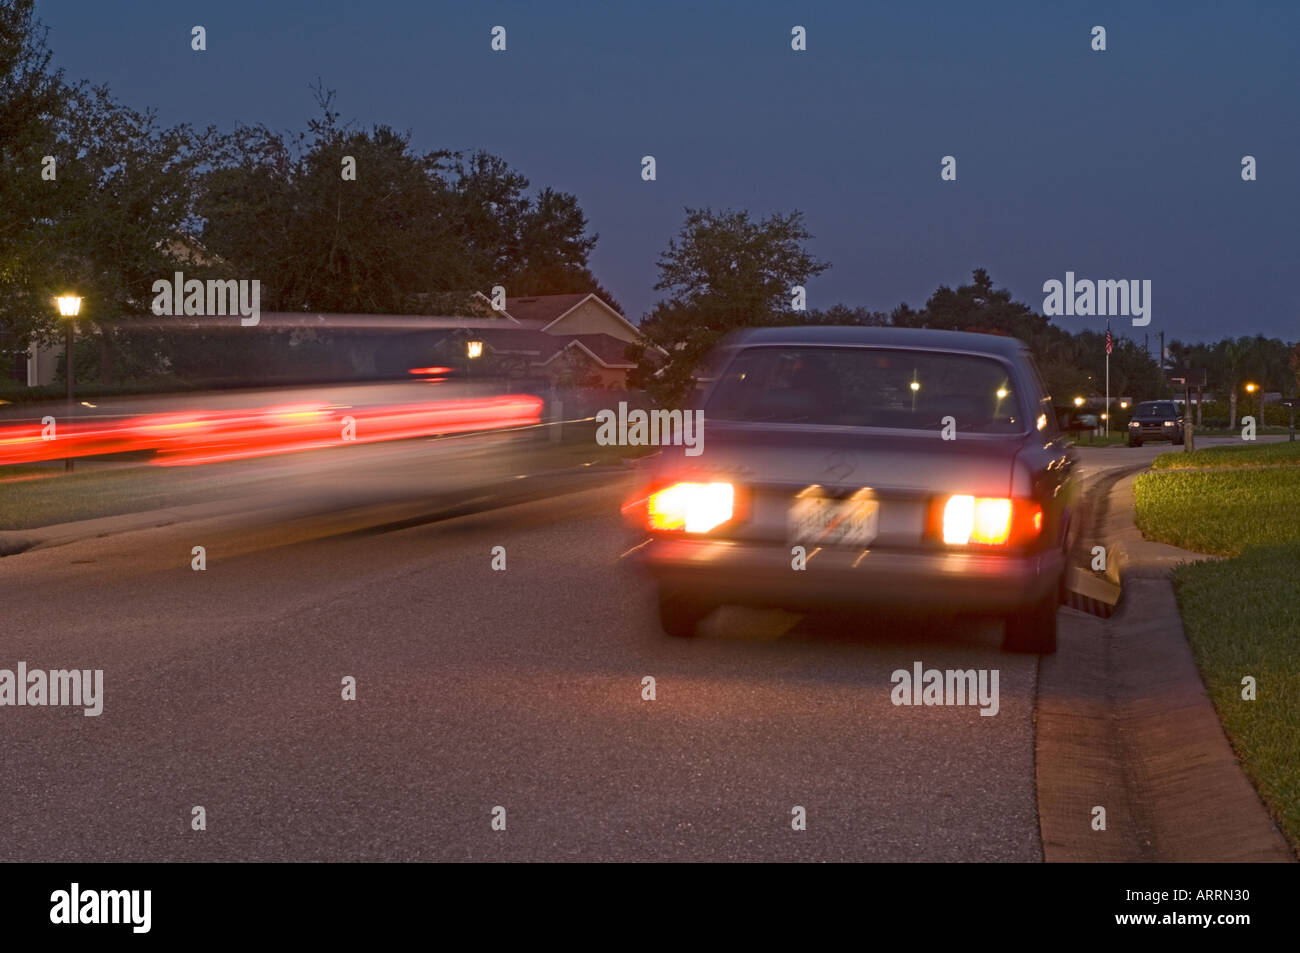 car drag racing in upscale residential area at night Stock Photo